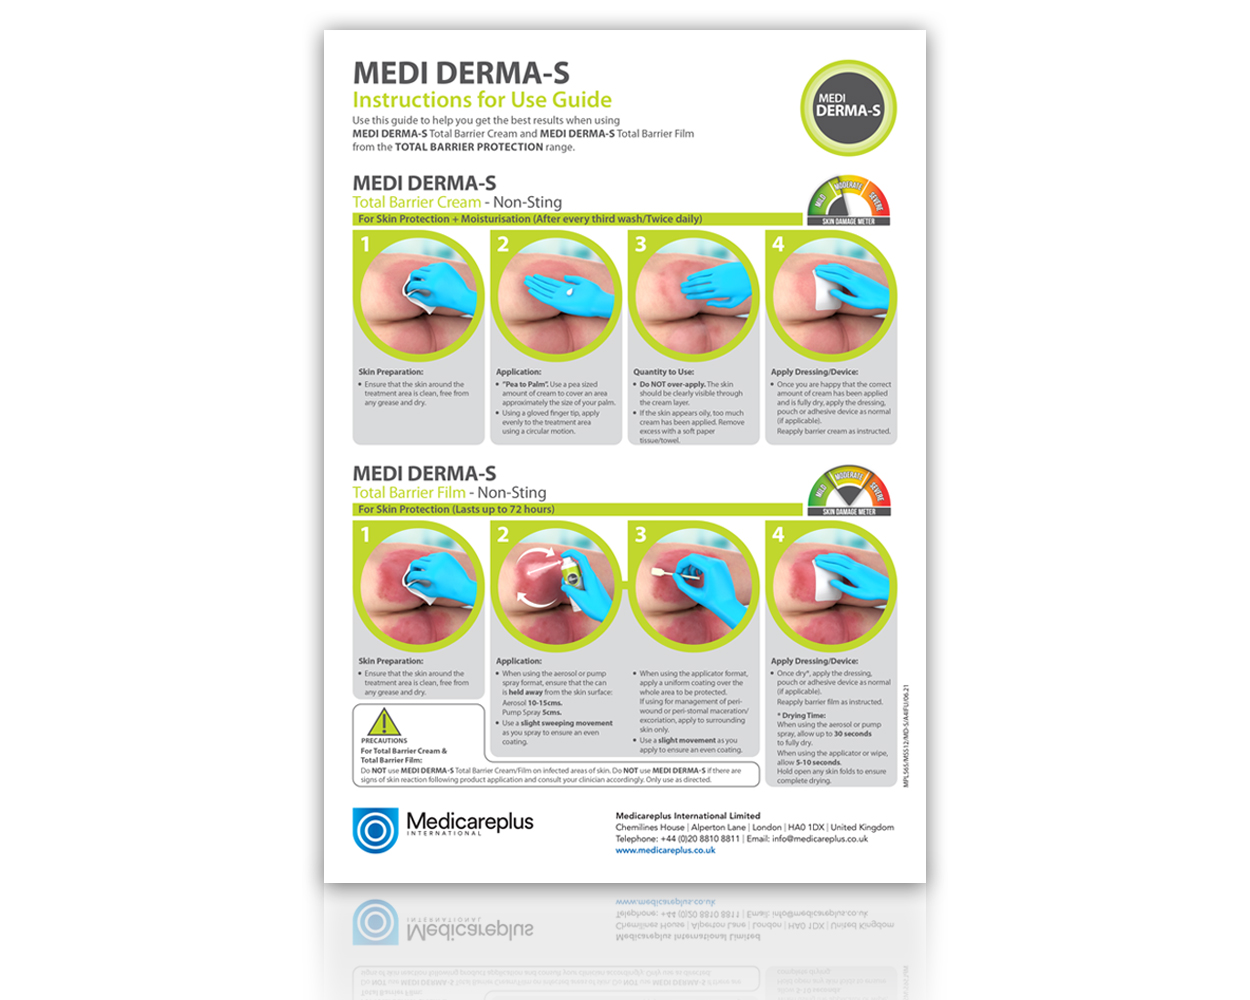 Medi Derma-S Cream and Film - Instructions for use guide